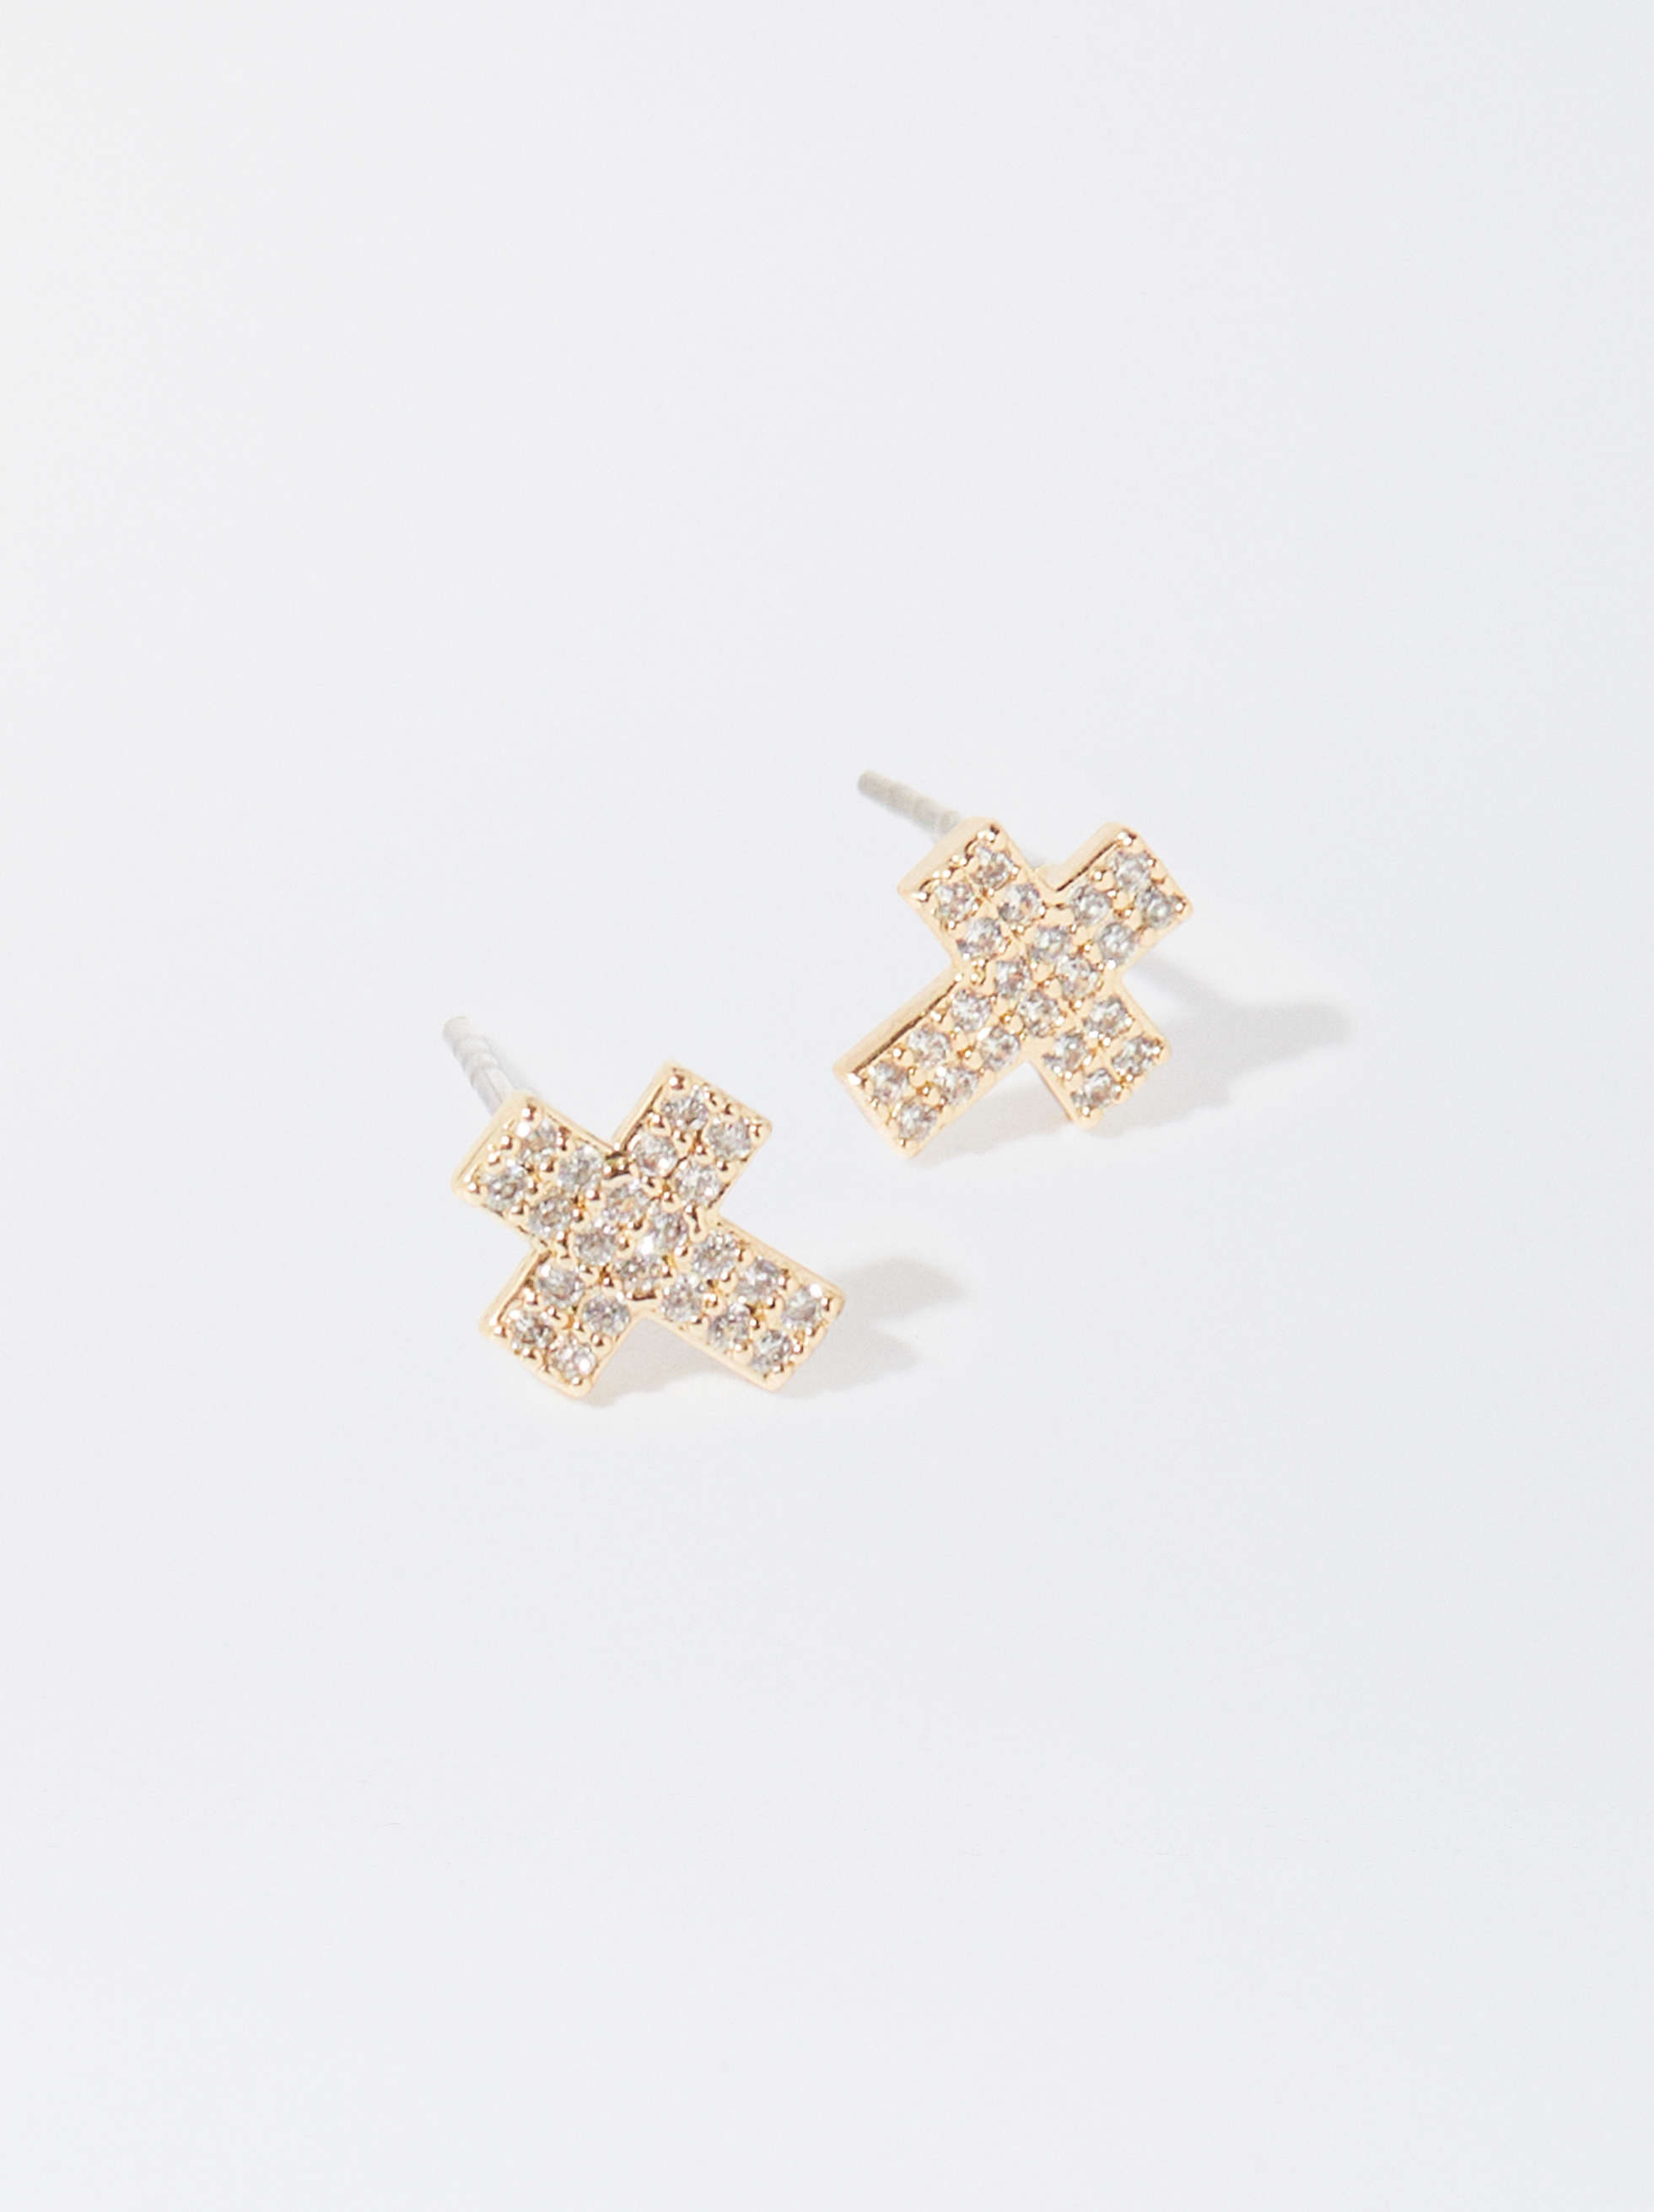 Silver-Plated Earrings With Cubic Zirconia And Crosses image number 2.0